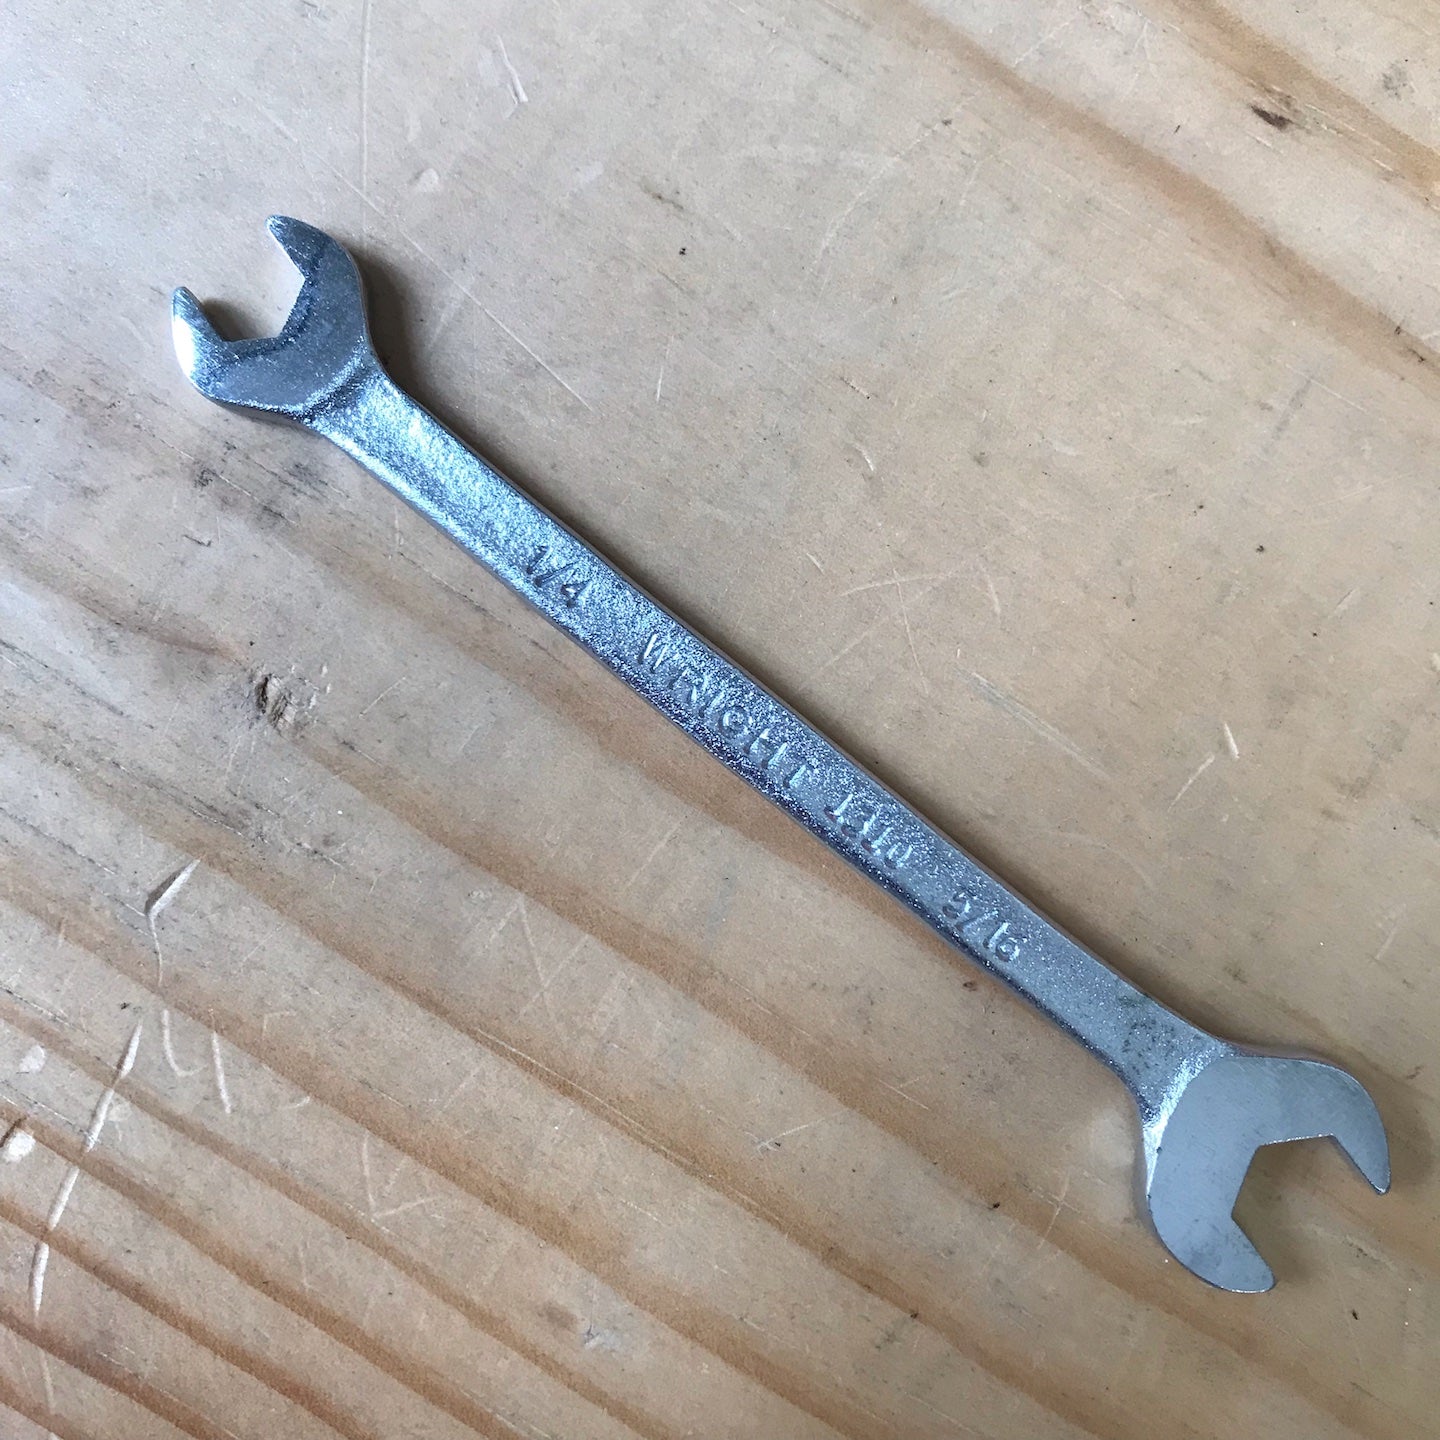 NOS Wright 5/16" x 1/4" Open End Wrench (1310-C)